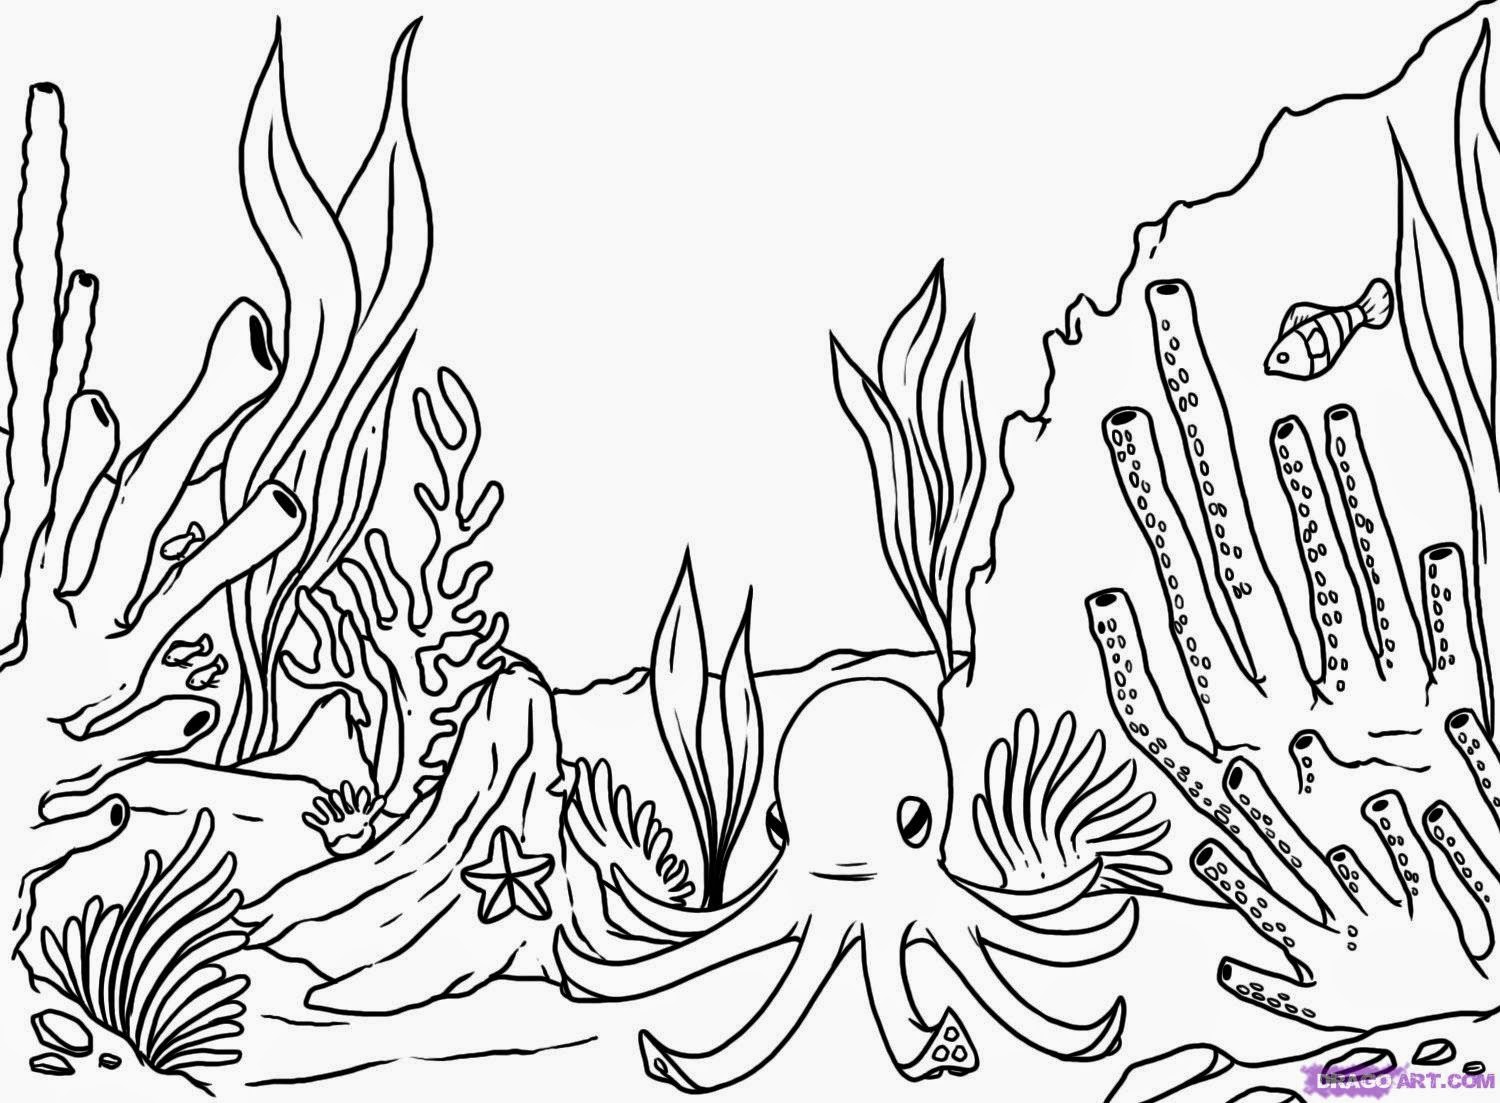 Step-by-Step Drawing of a Coral Reef